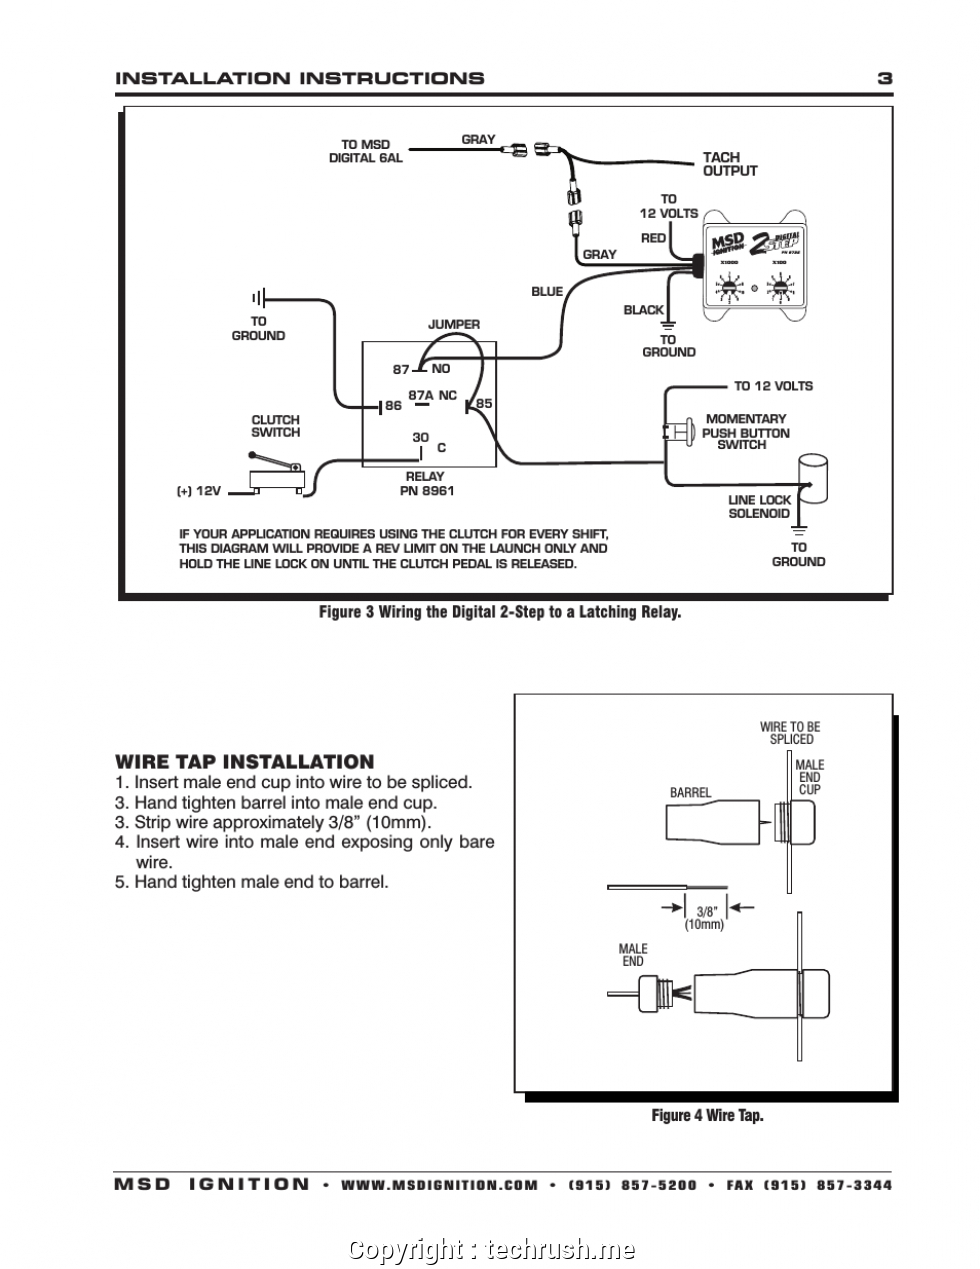 Wiring Diagram For Msd 2 Step | Manual E-Books - Msd 2 Step Wiring Diagram